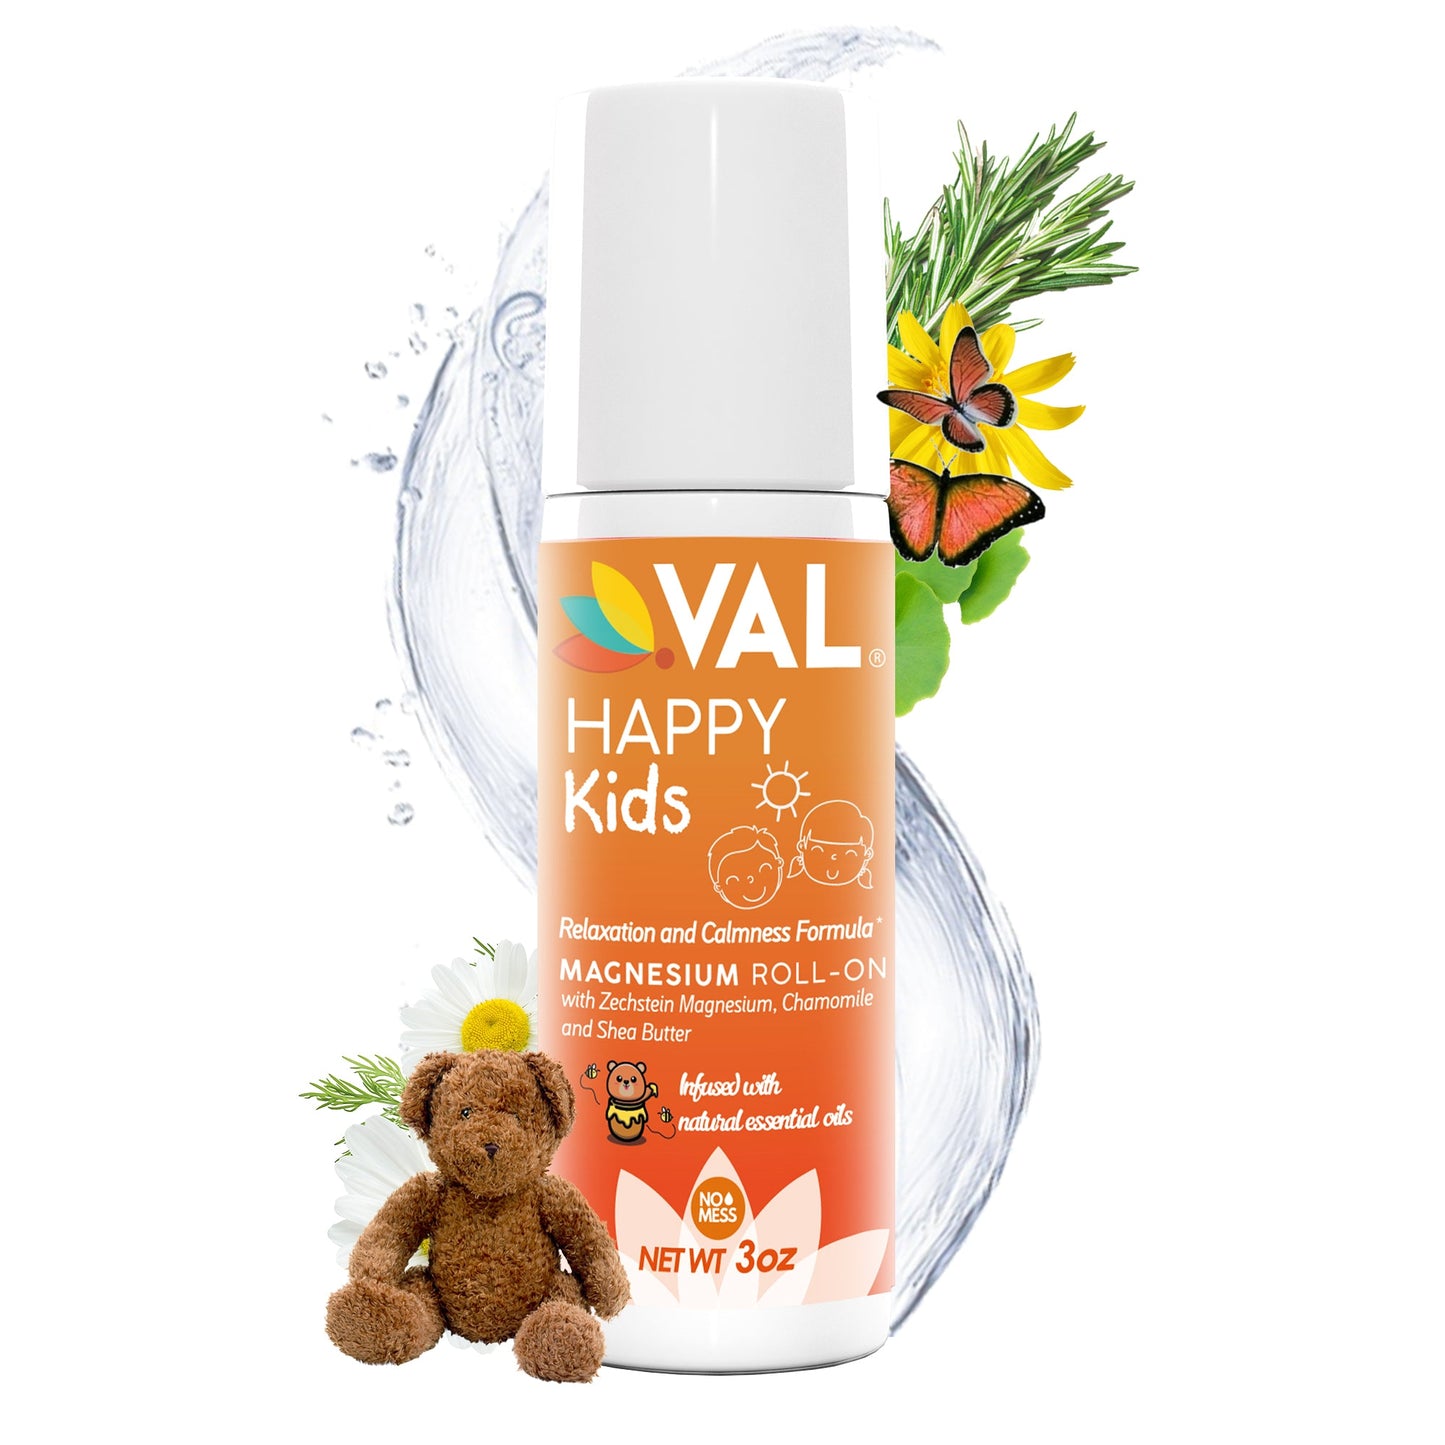 VAL Happy Kids Magnesium Roll-on for Kids - Relaxation and Calmness Formula - 3oz - Val Supplements